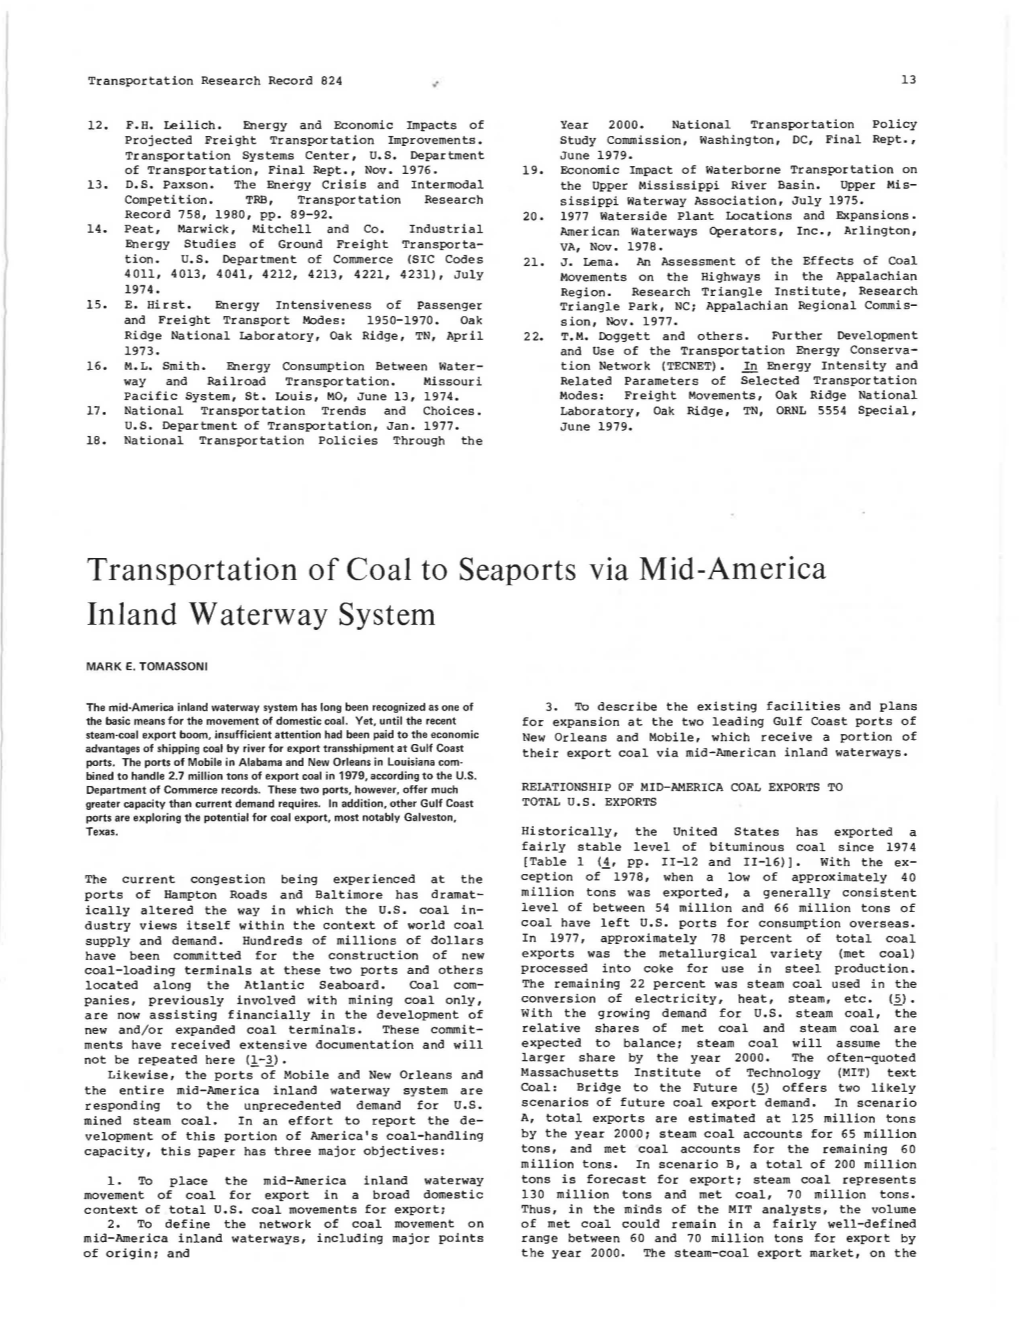 Transportation of Coal to Seaports Via Mid-America Inland Waterway System